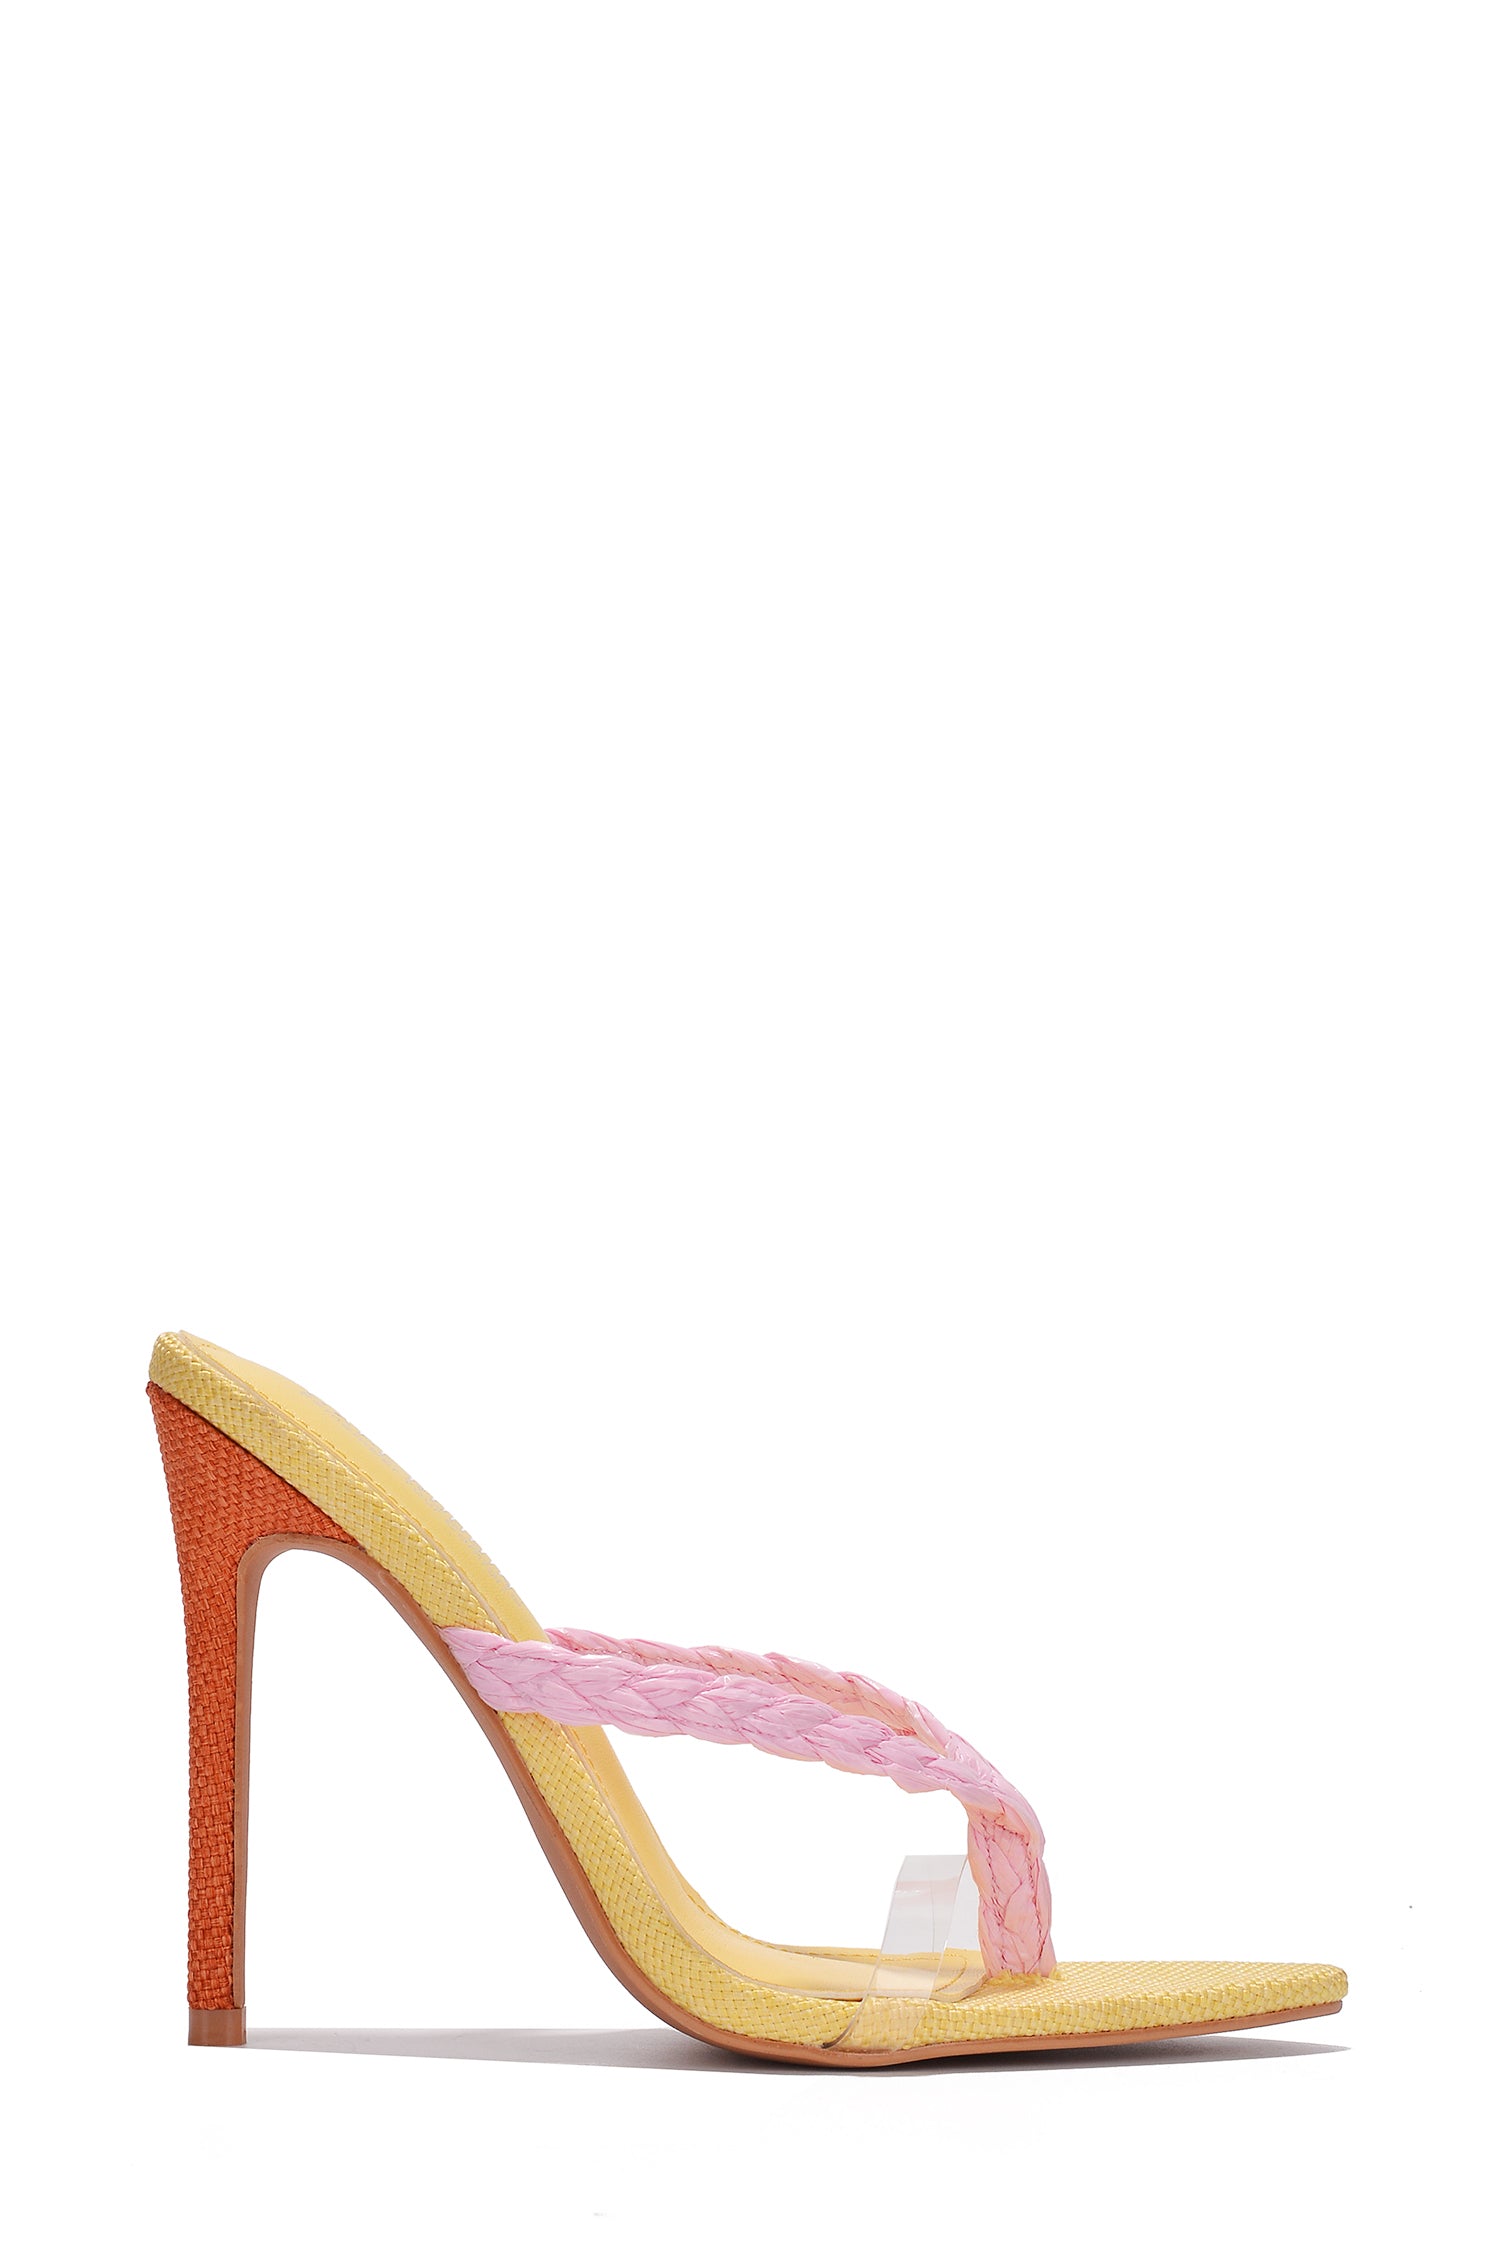 UrbanOG - Sugarcrush Thong Strap Pointed Toe Stiletto Heels with Clear Upp - HEELS